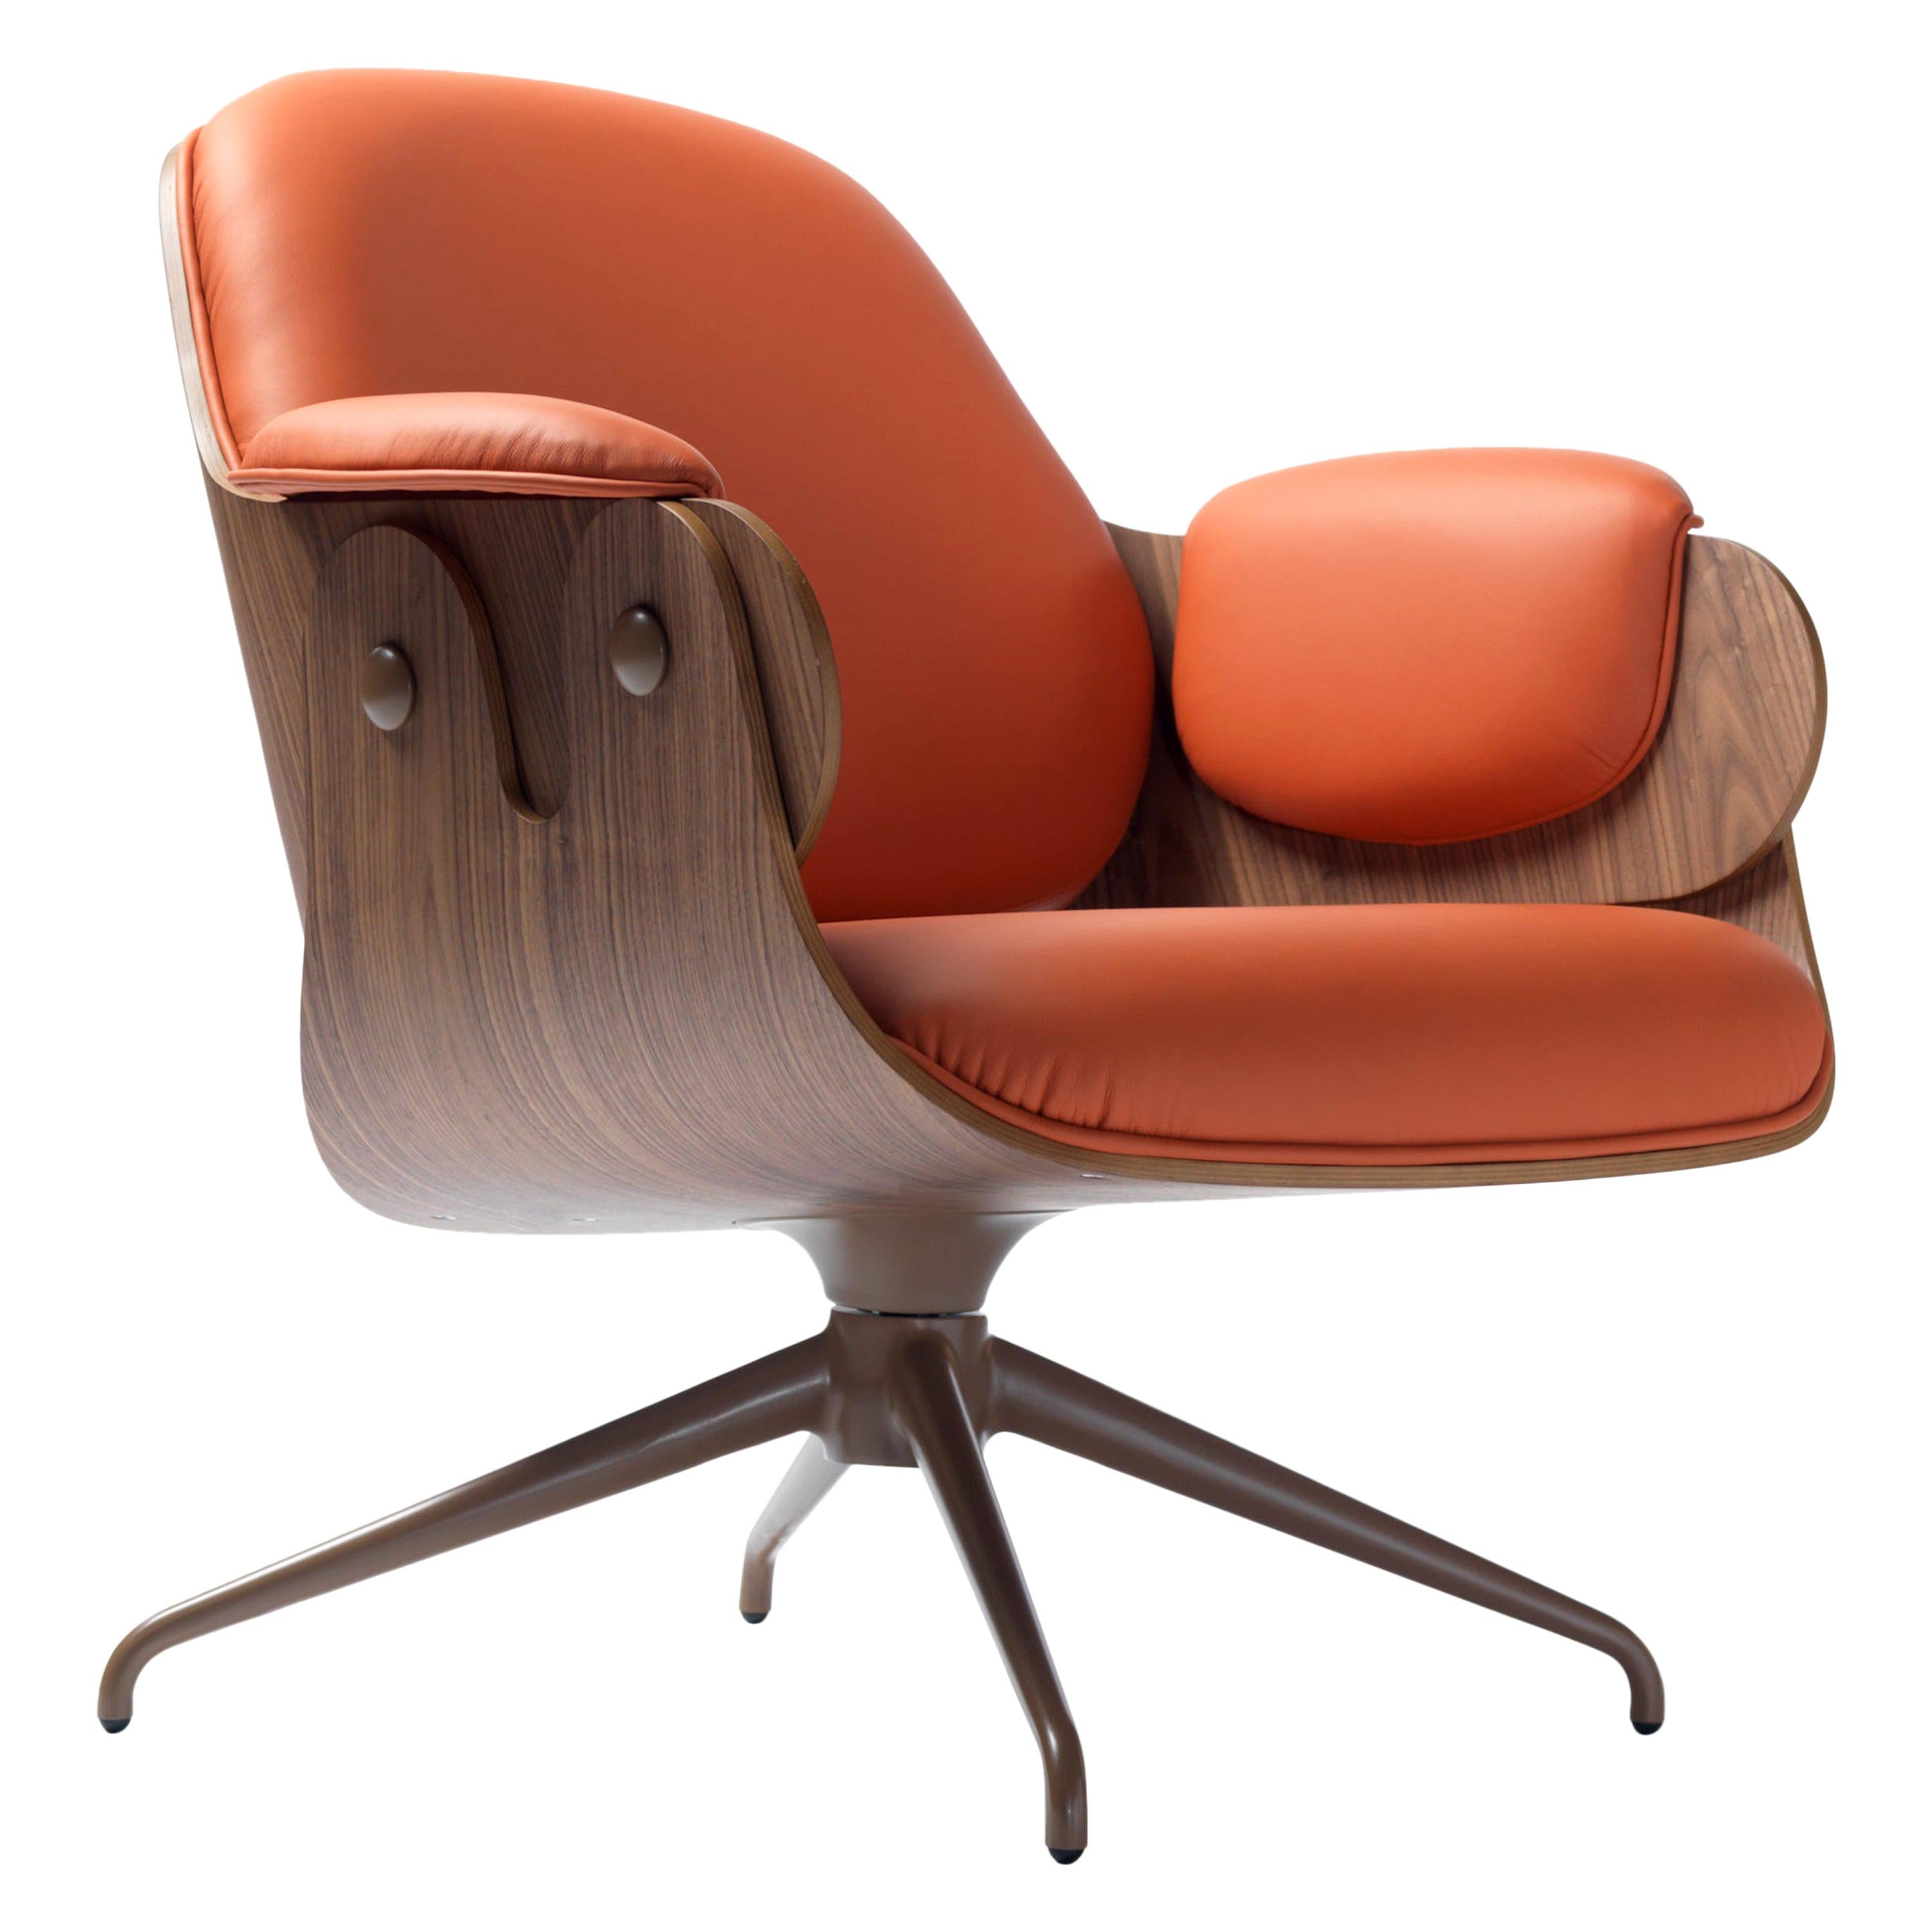 Jaime Hayon, Contemporary, Plywood Orange Leather Low Lounger Armchair For Sale